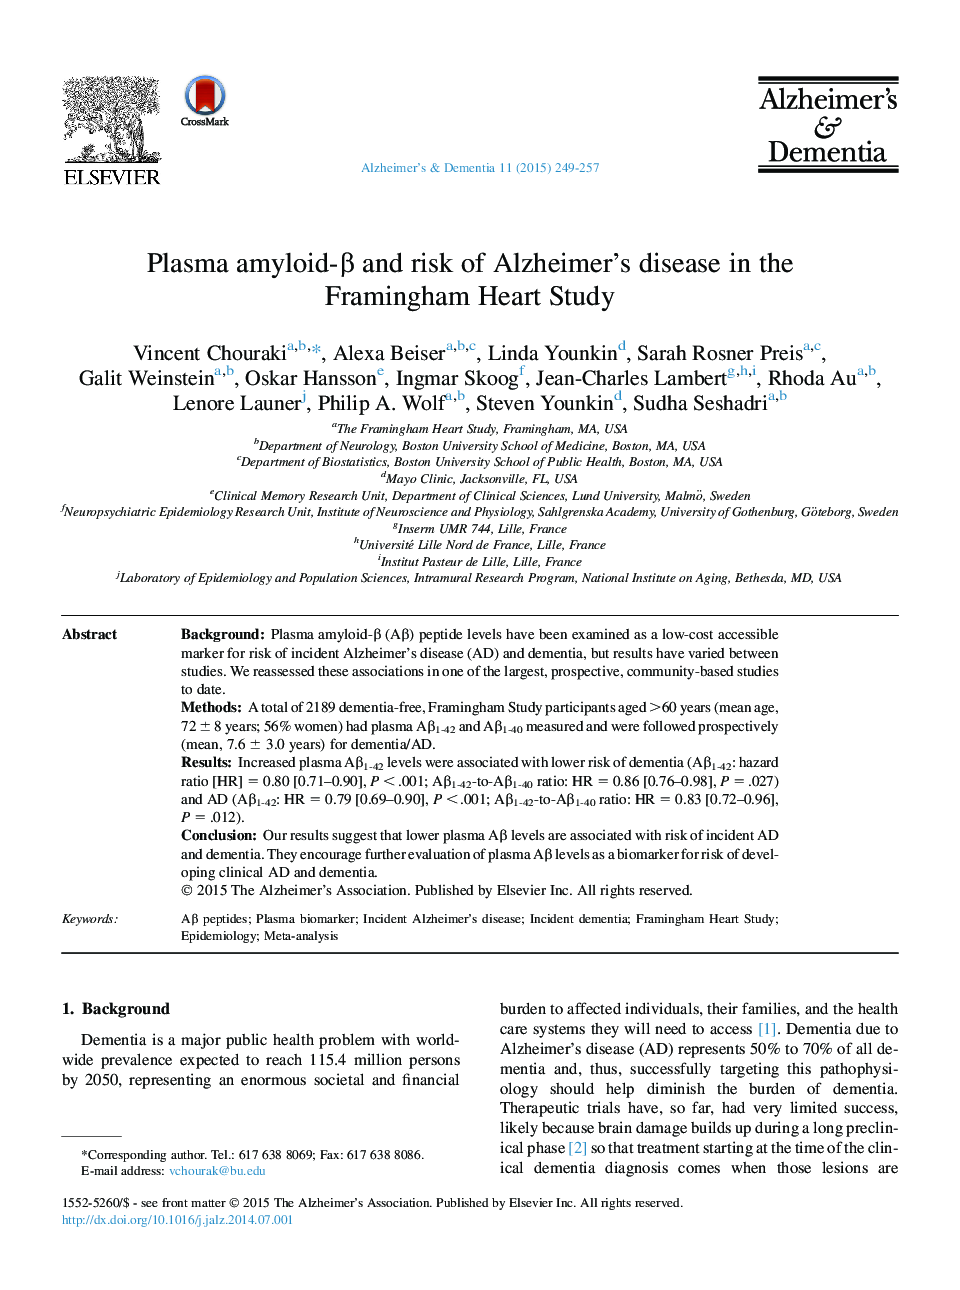 Featured ArticlePlasma amyloid-Î² and risk of Alzheimer's disease in the Framingham Heart Study